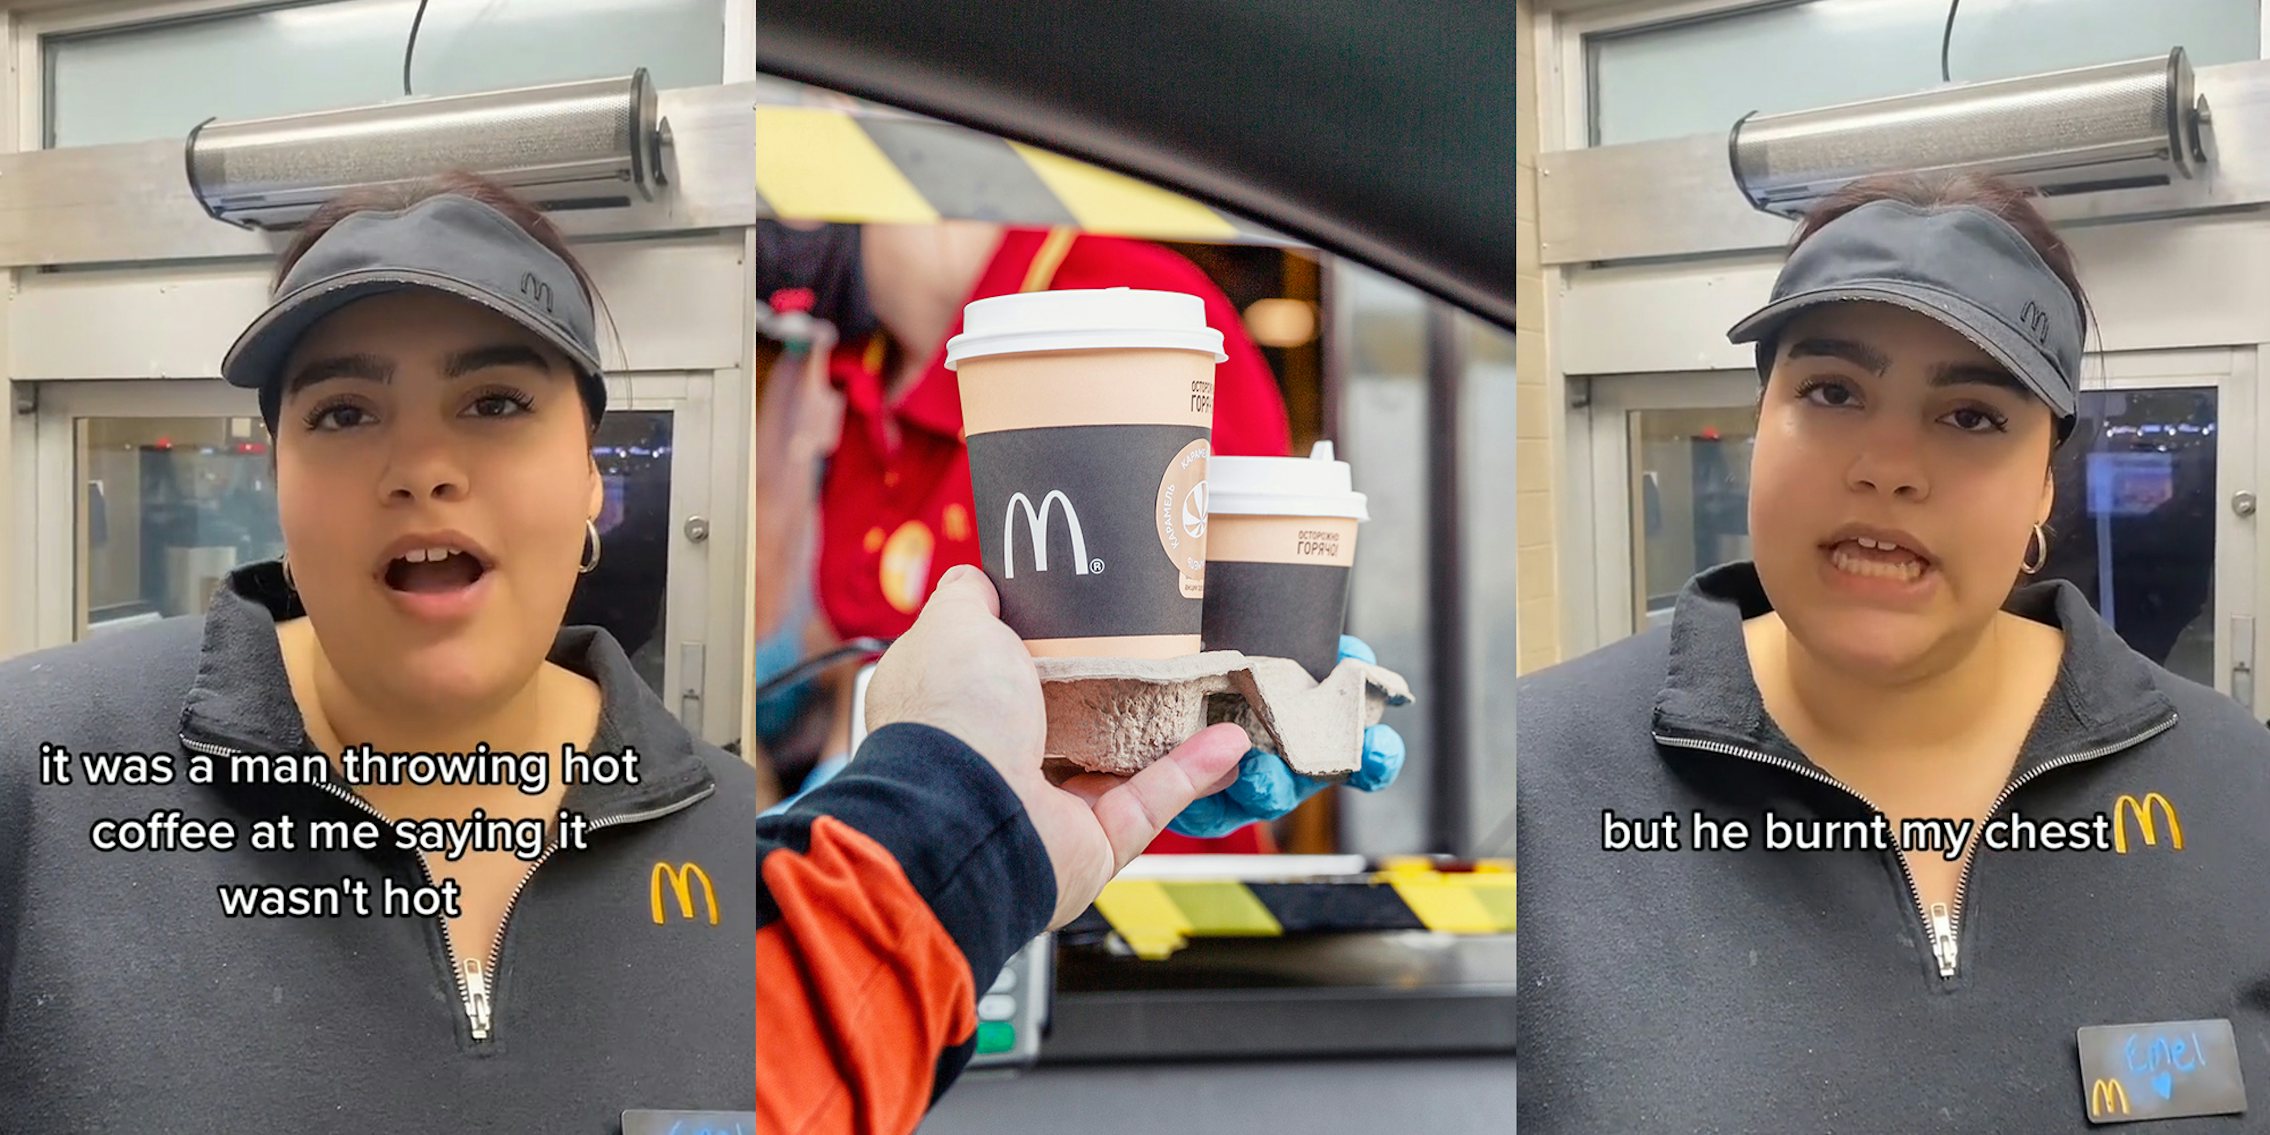 McDonald's worker speaking with caption 'it was a man throwing hot coffee at me saying it wasn't hot' (l) McDonald's customer holding coffee at drive thru (c) McDonald's worker speaking with caption 'but he burnt my chest' (r)